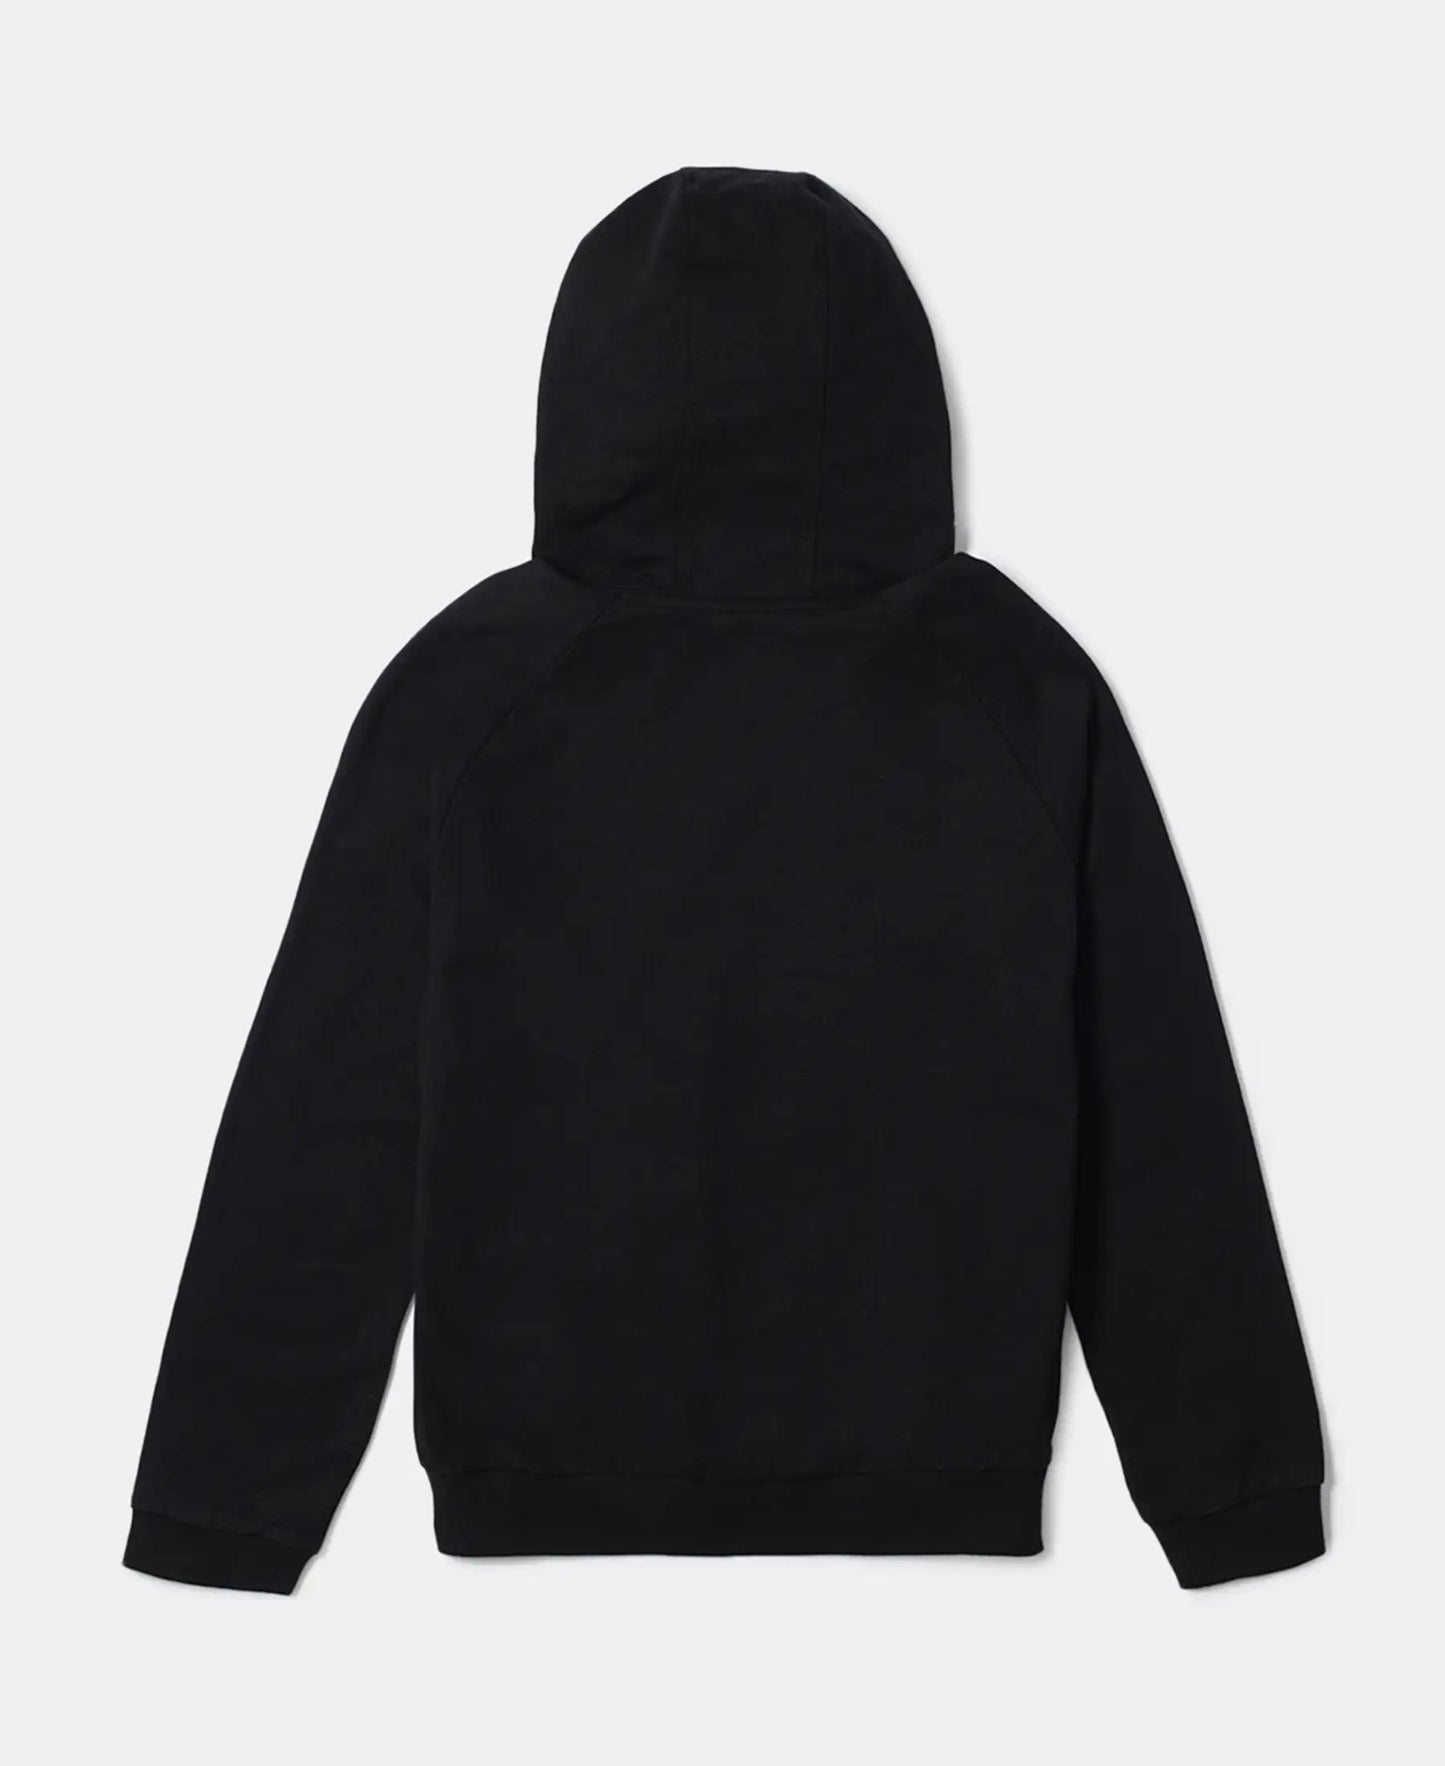 Super Combed Cotton French Terry Graphic Printed Hoodie Sweatshirt - Black-2